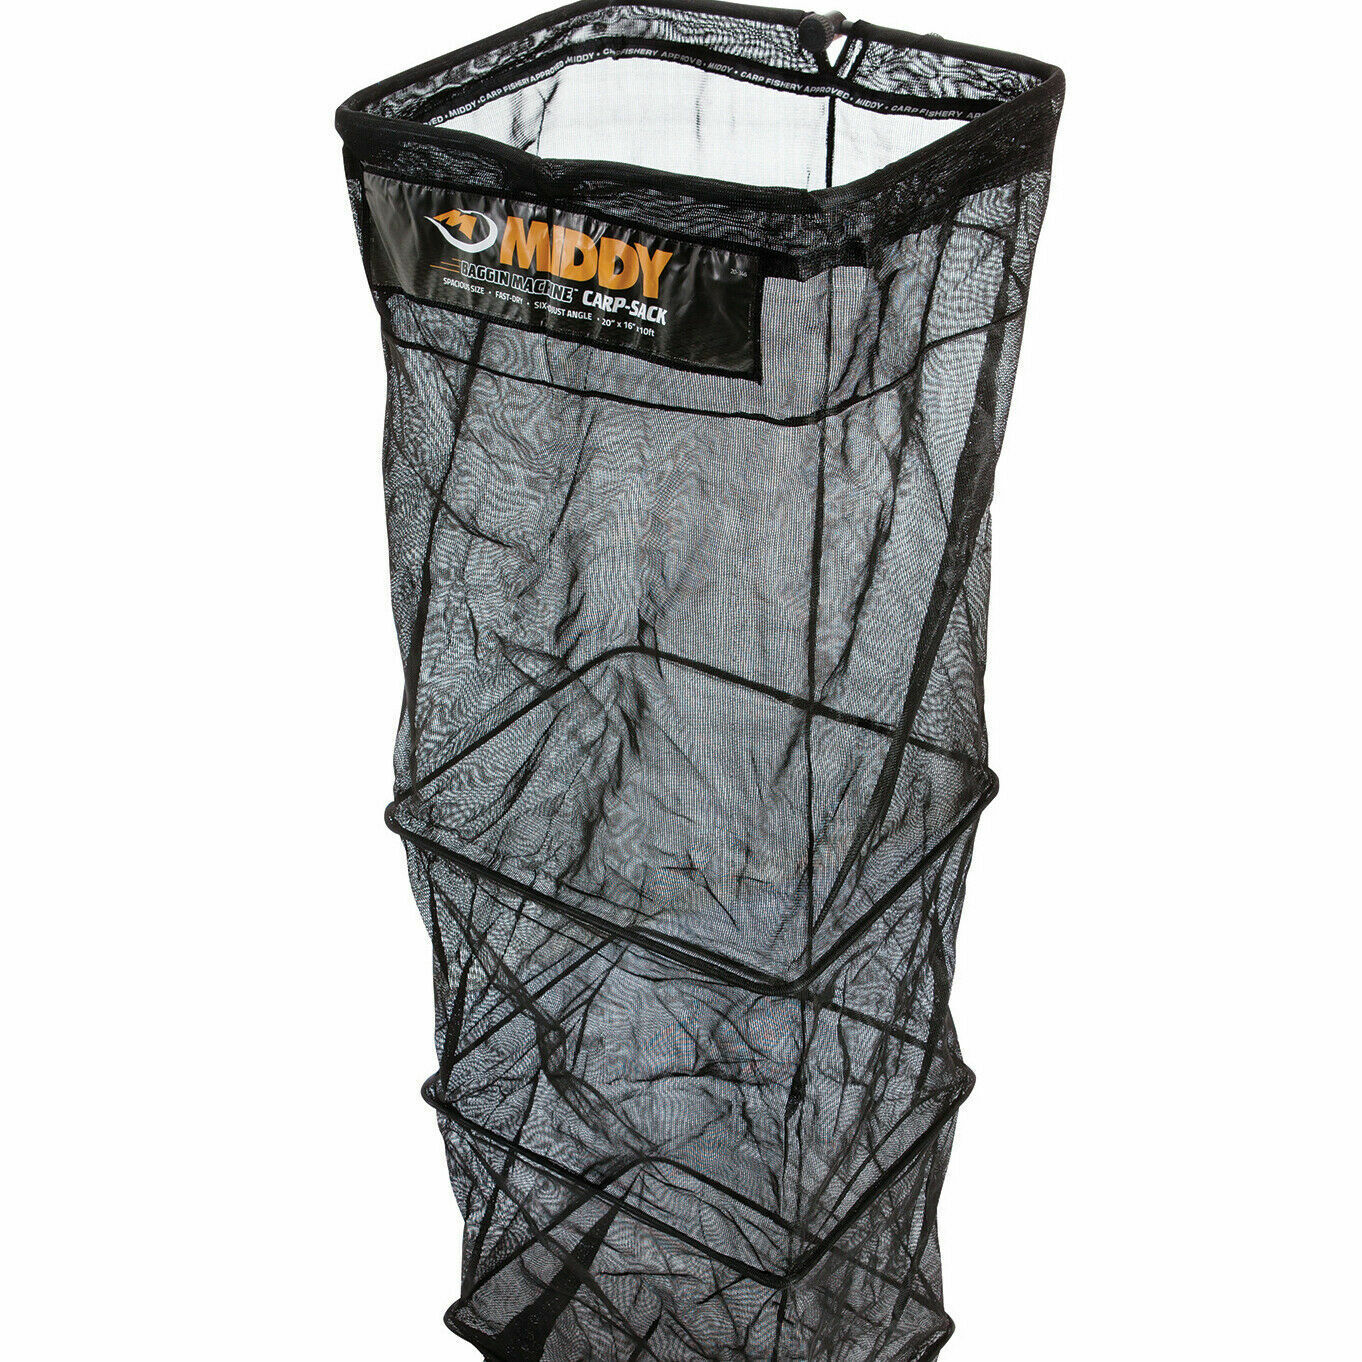 Middy Baggin Machine Keep Net - The Angling Centre Ltd